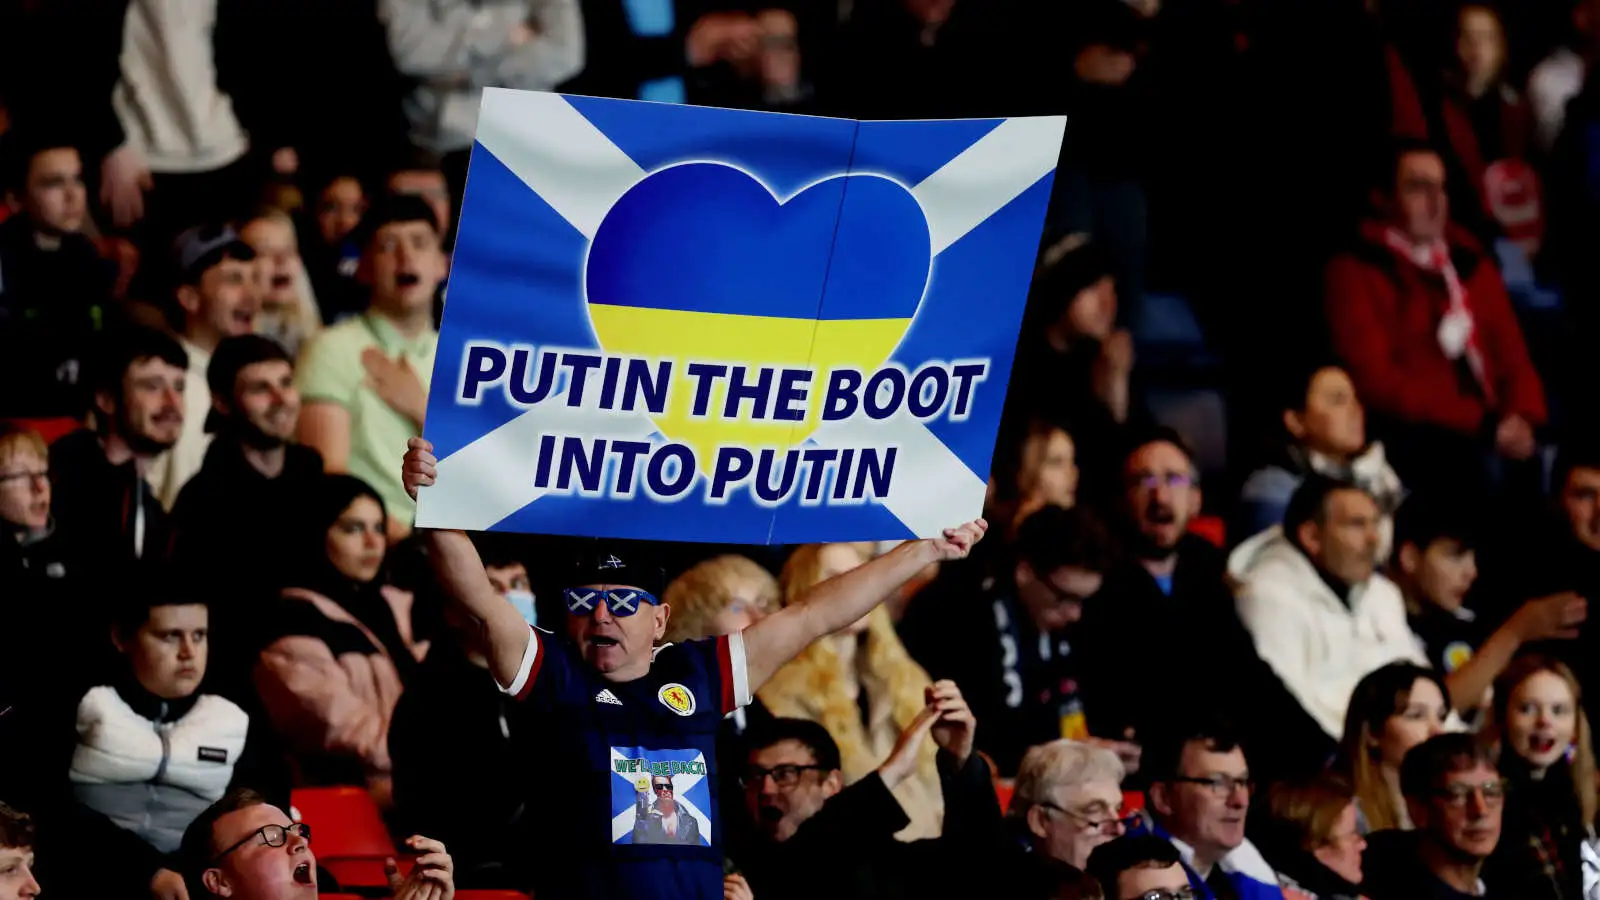 Scotland v Ukraine will be emotionally loaded like no other match this year